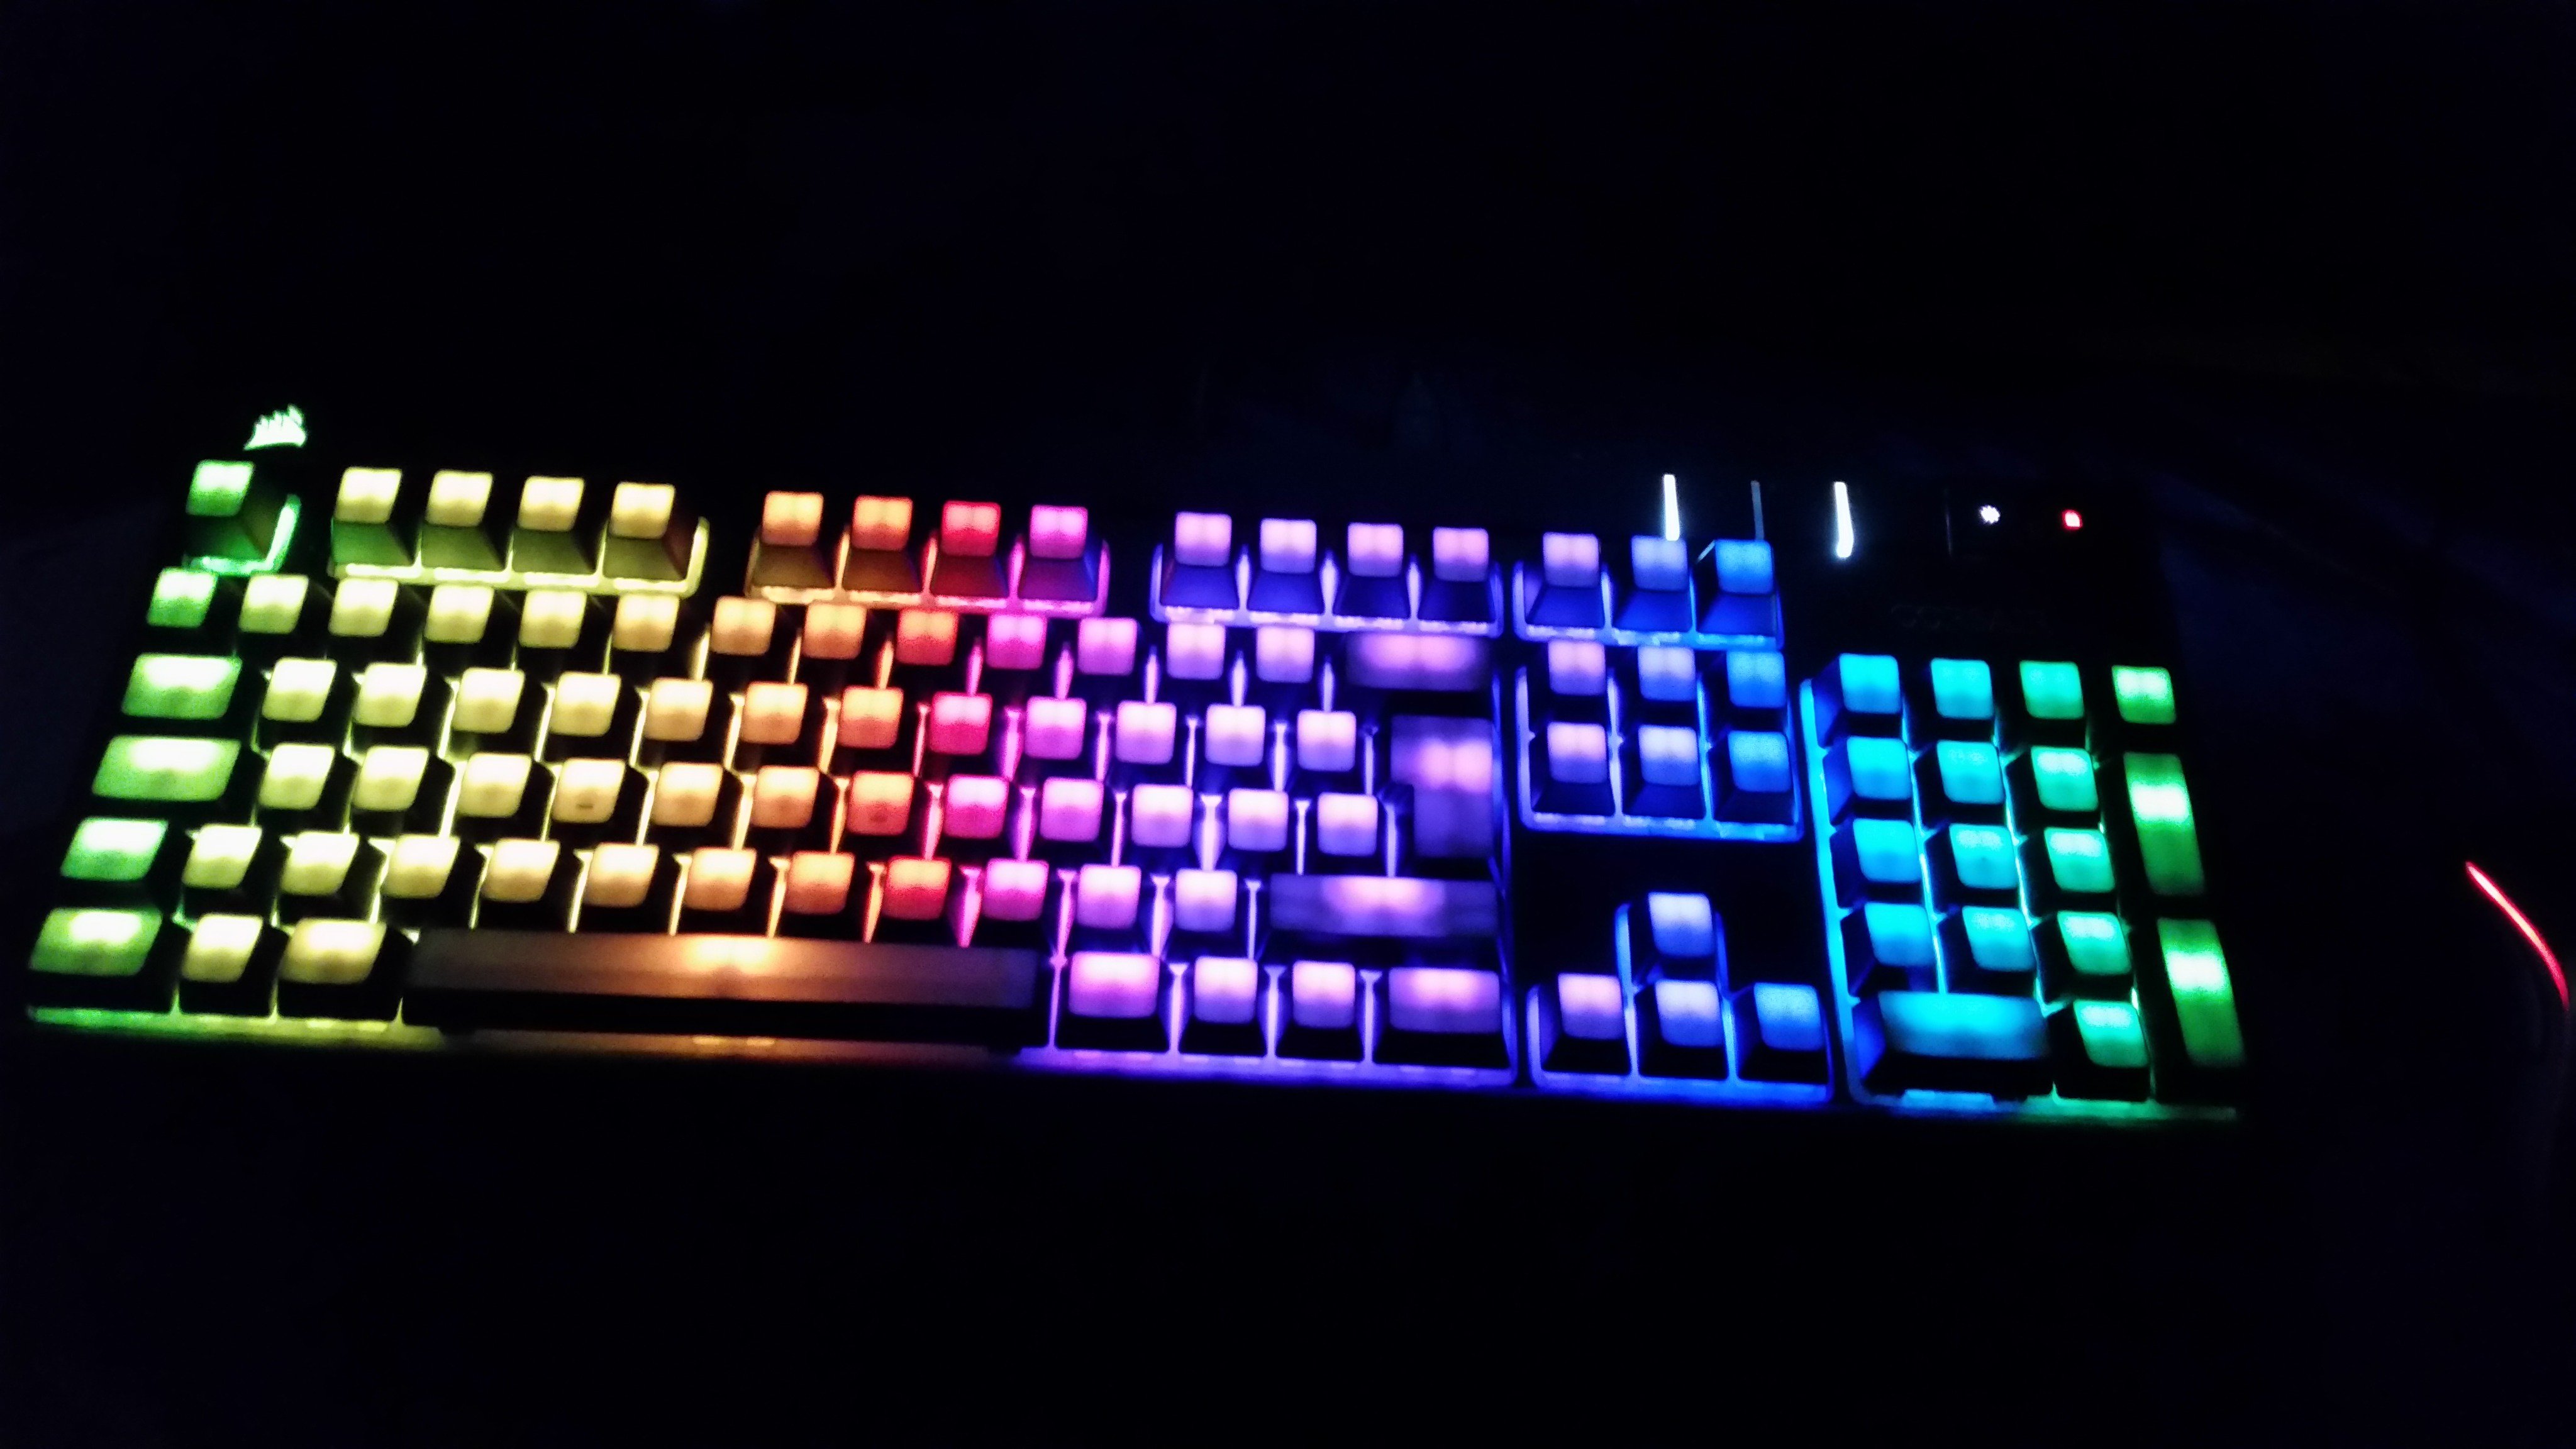 Max Keyboard on Twitter: "J's Corsair Strafe board with our custom translucent top keycap set... truly one of kind. https://t.co/gU4iXHW3nq" /